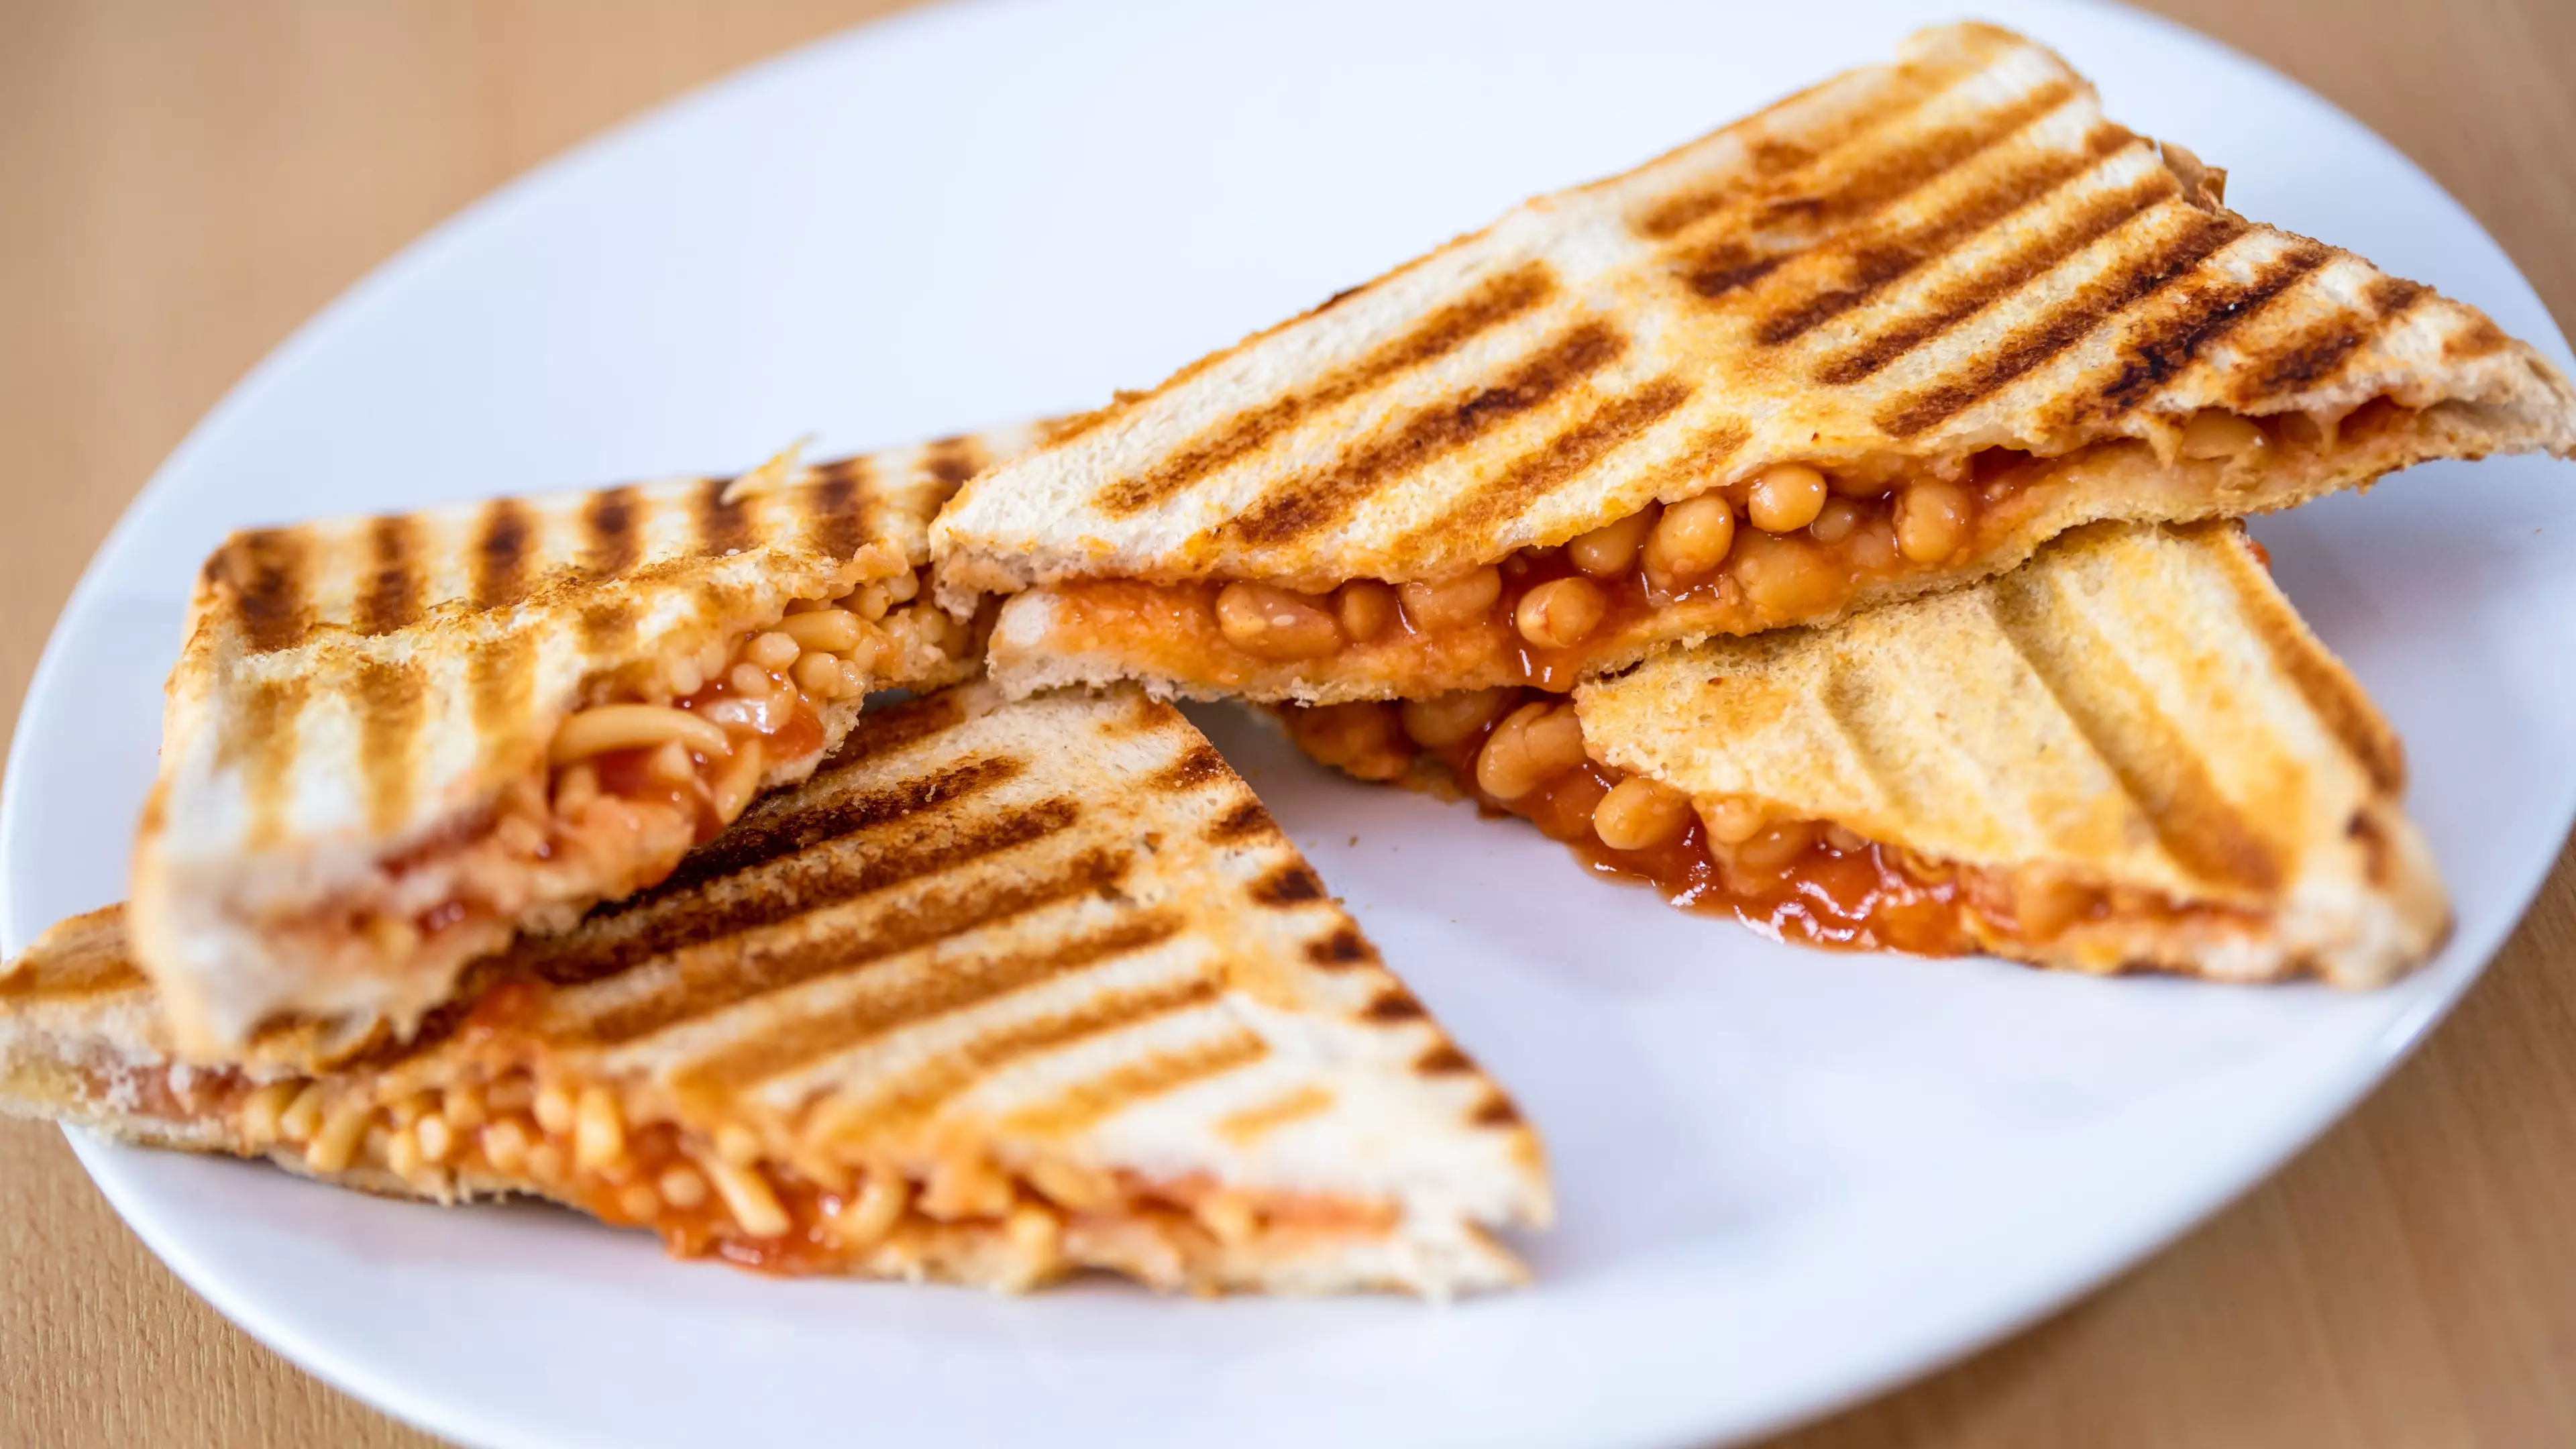 Australians Are Putting Tinned Spaghetti In Toasties And People Are Disgusted